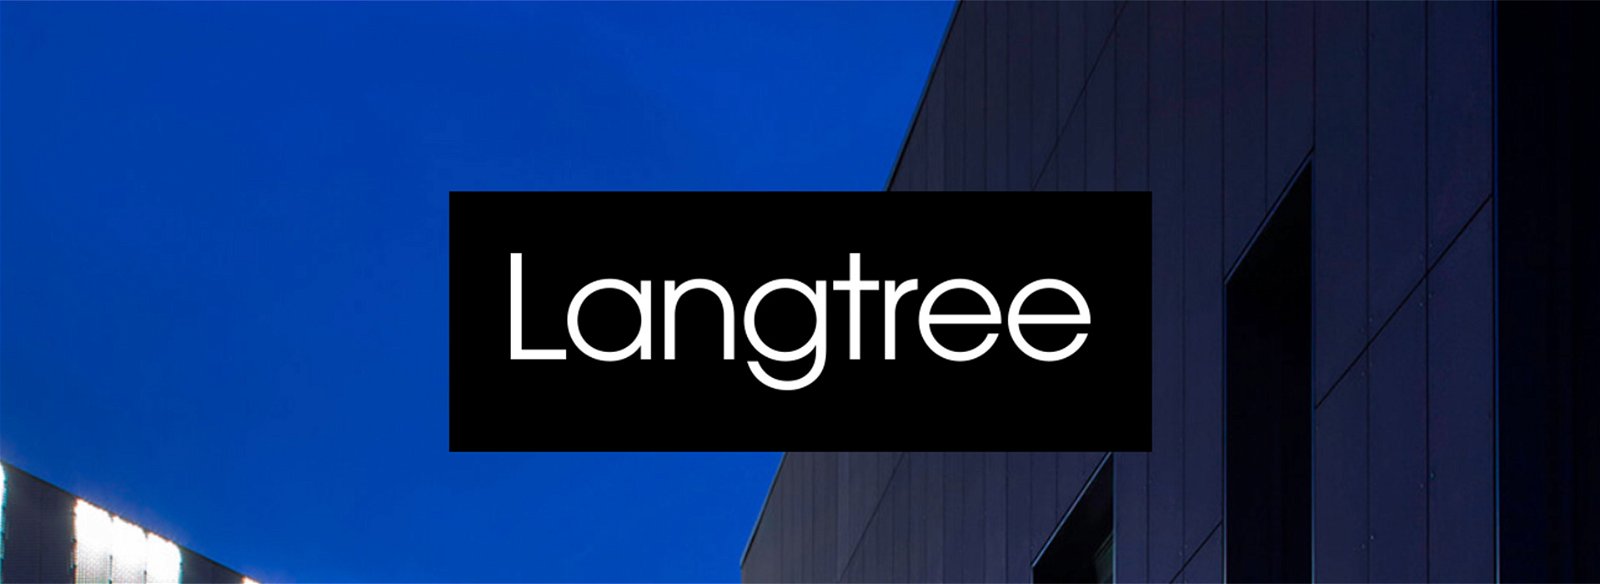 Langtree uses Trace Solutions proeprty management systems